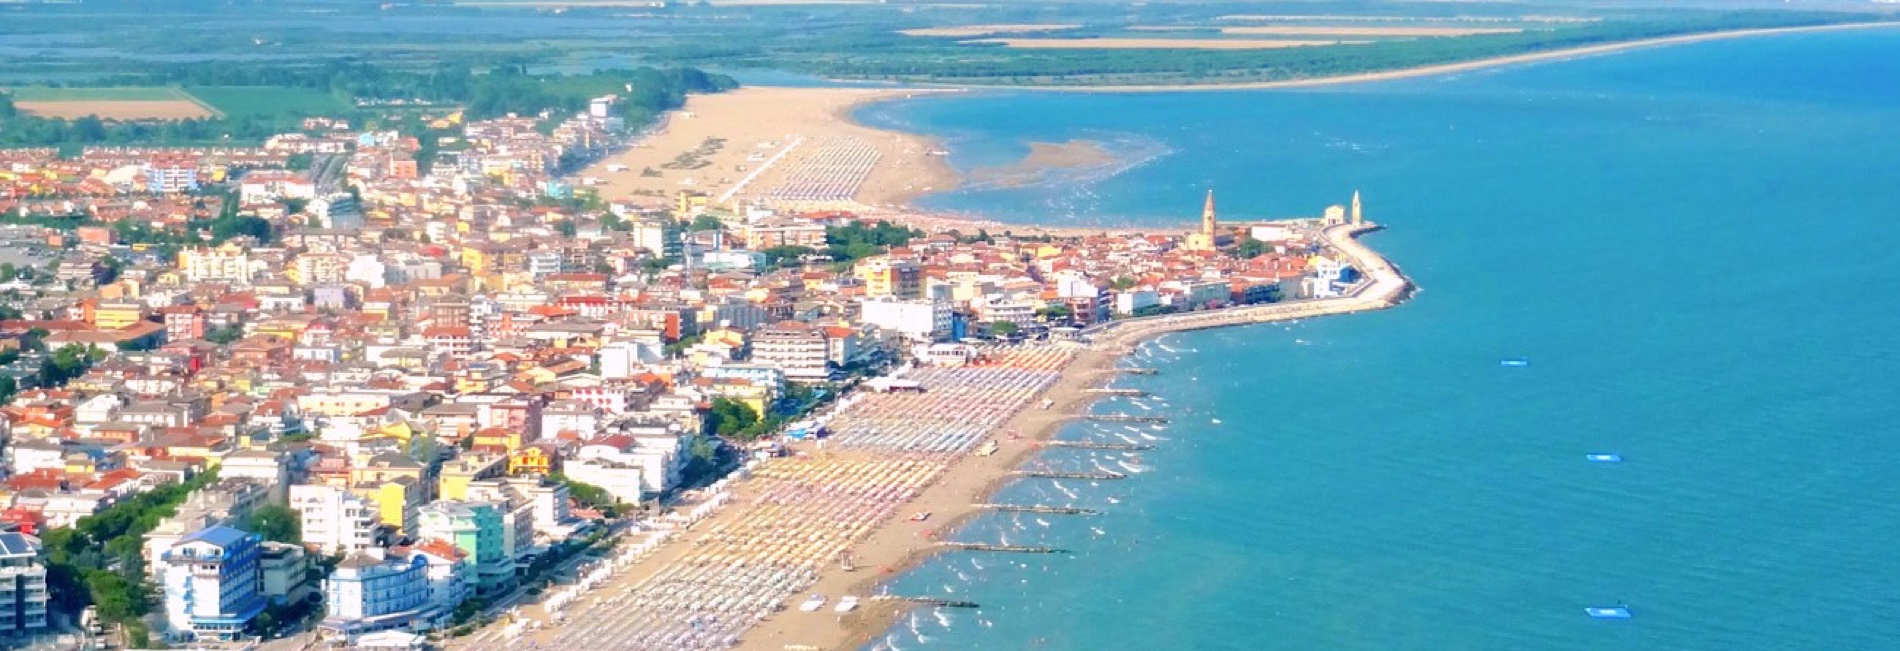 caorle-official-website-for-reservations-hotels-apartments-villages